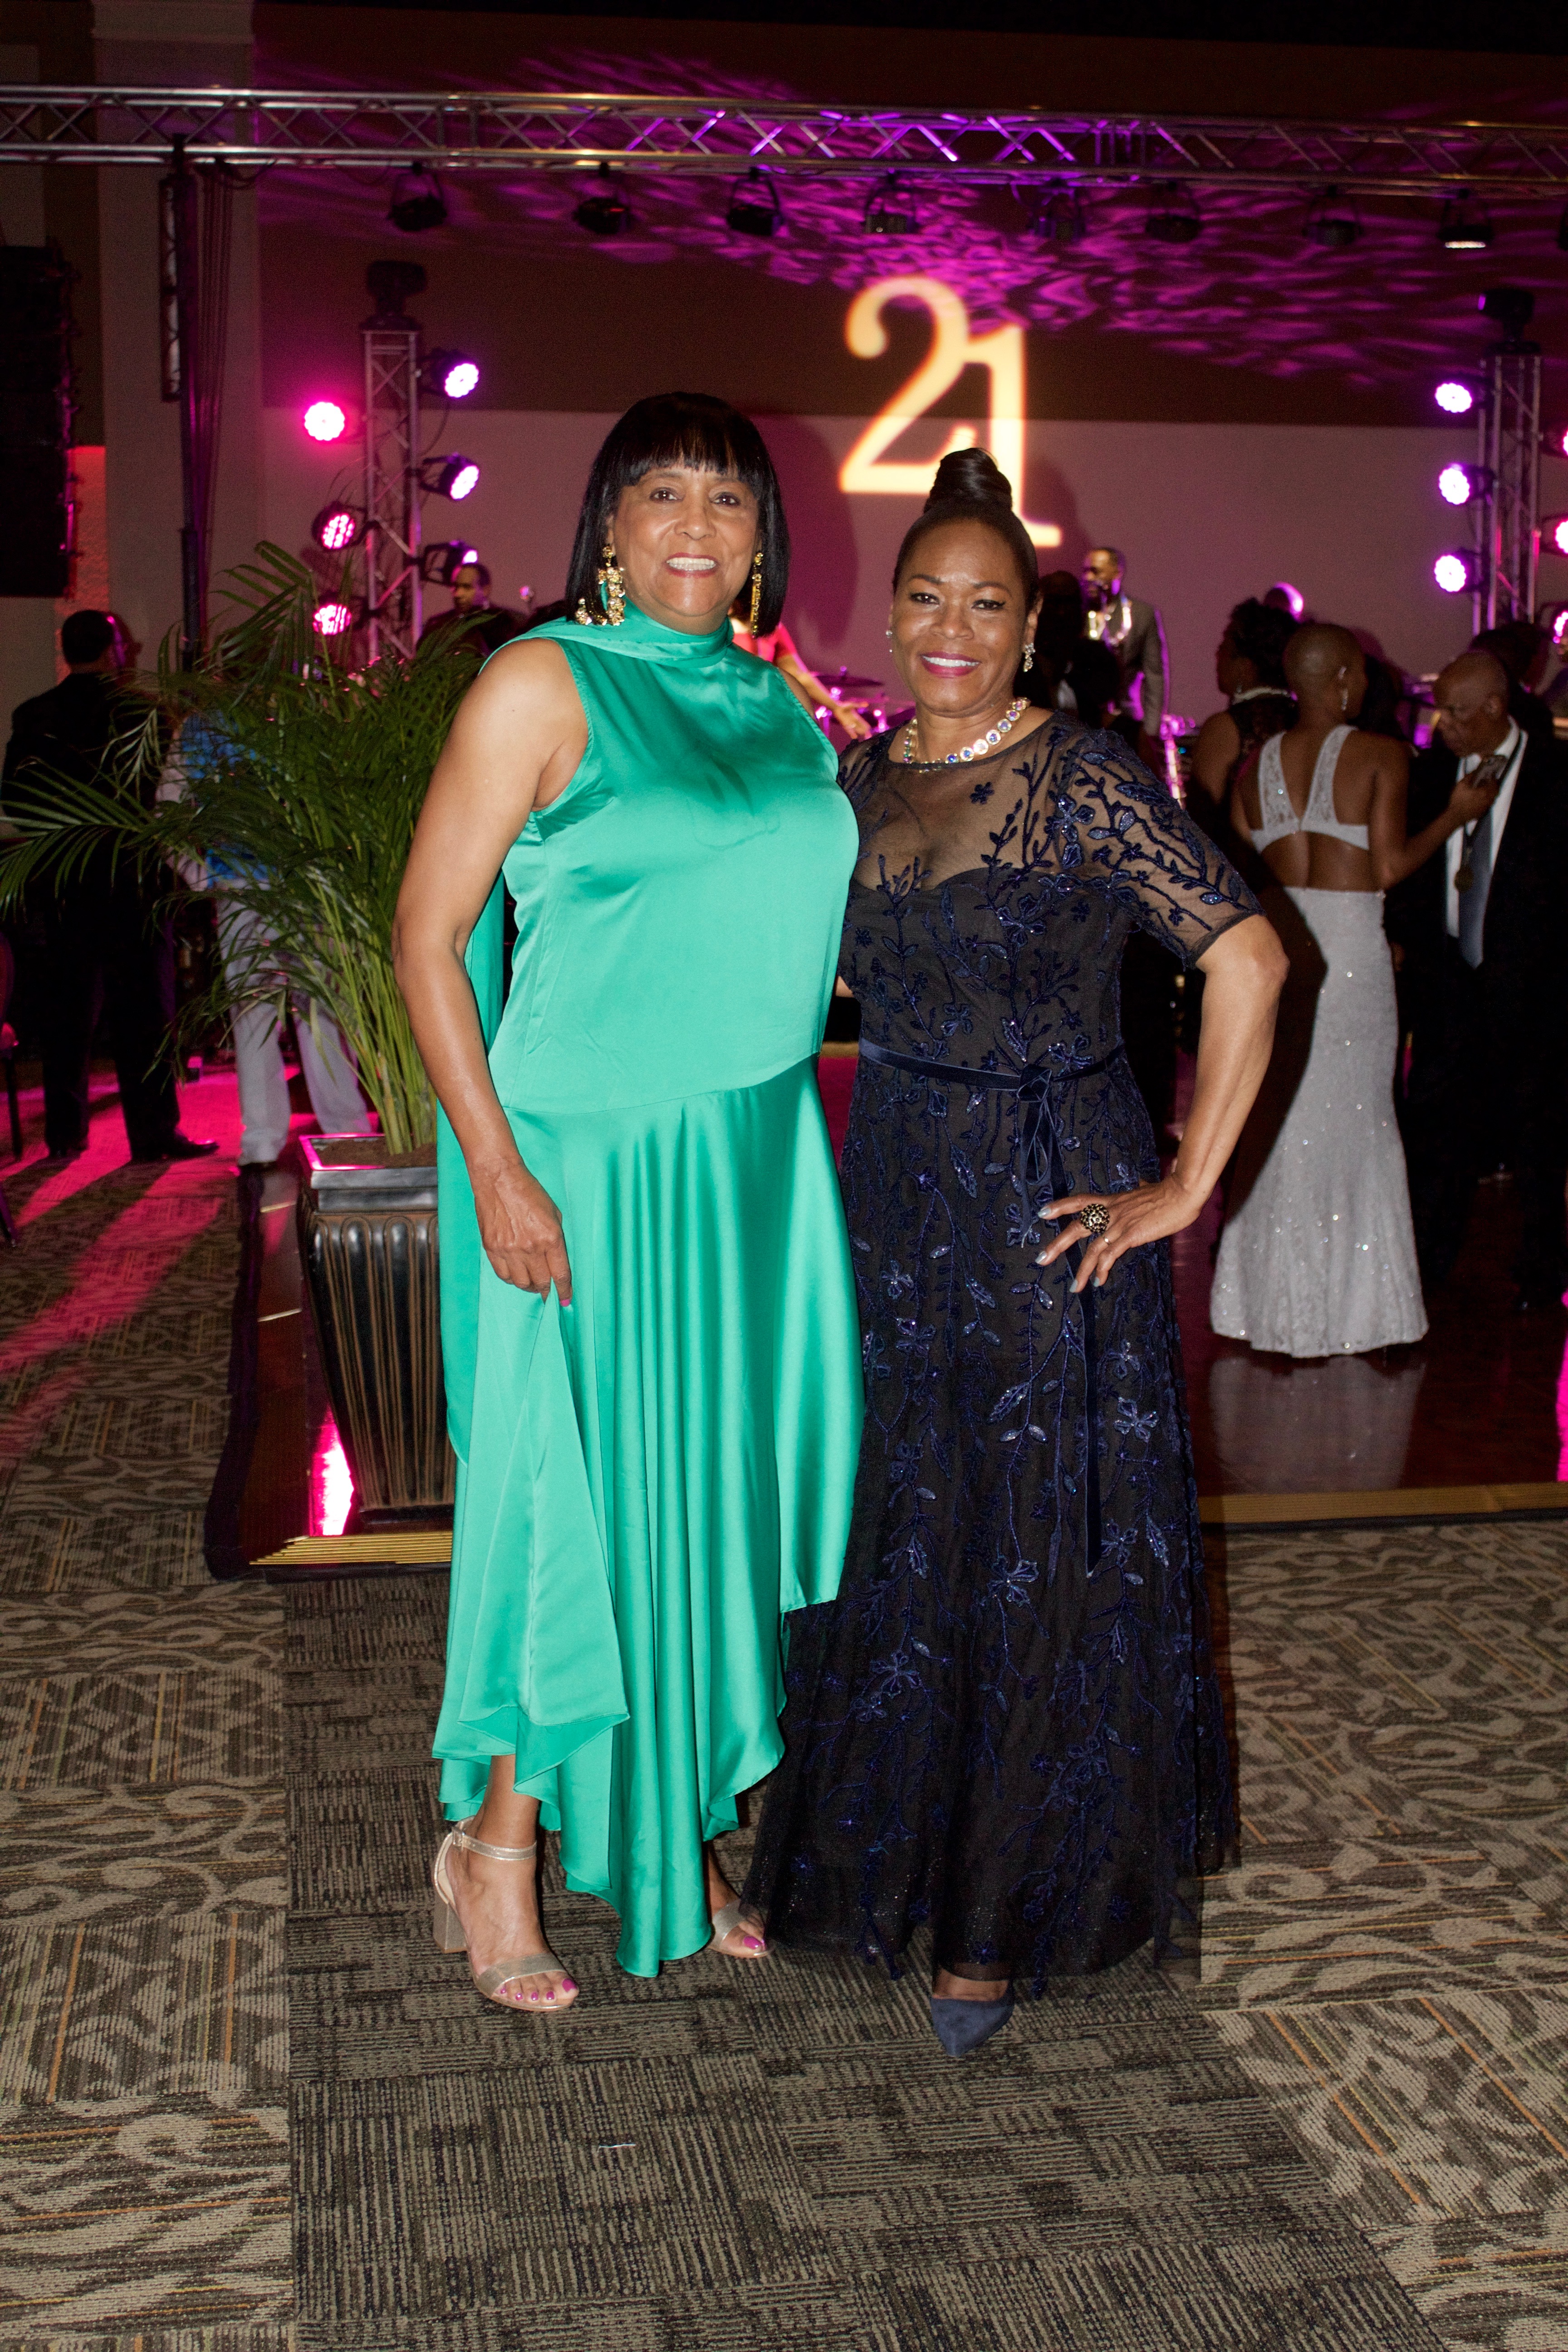 Bestie, Cynthia and Me at the 2019 Club Twenty-One Dinner Dance - A Night to Remember